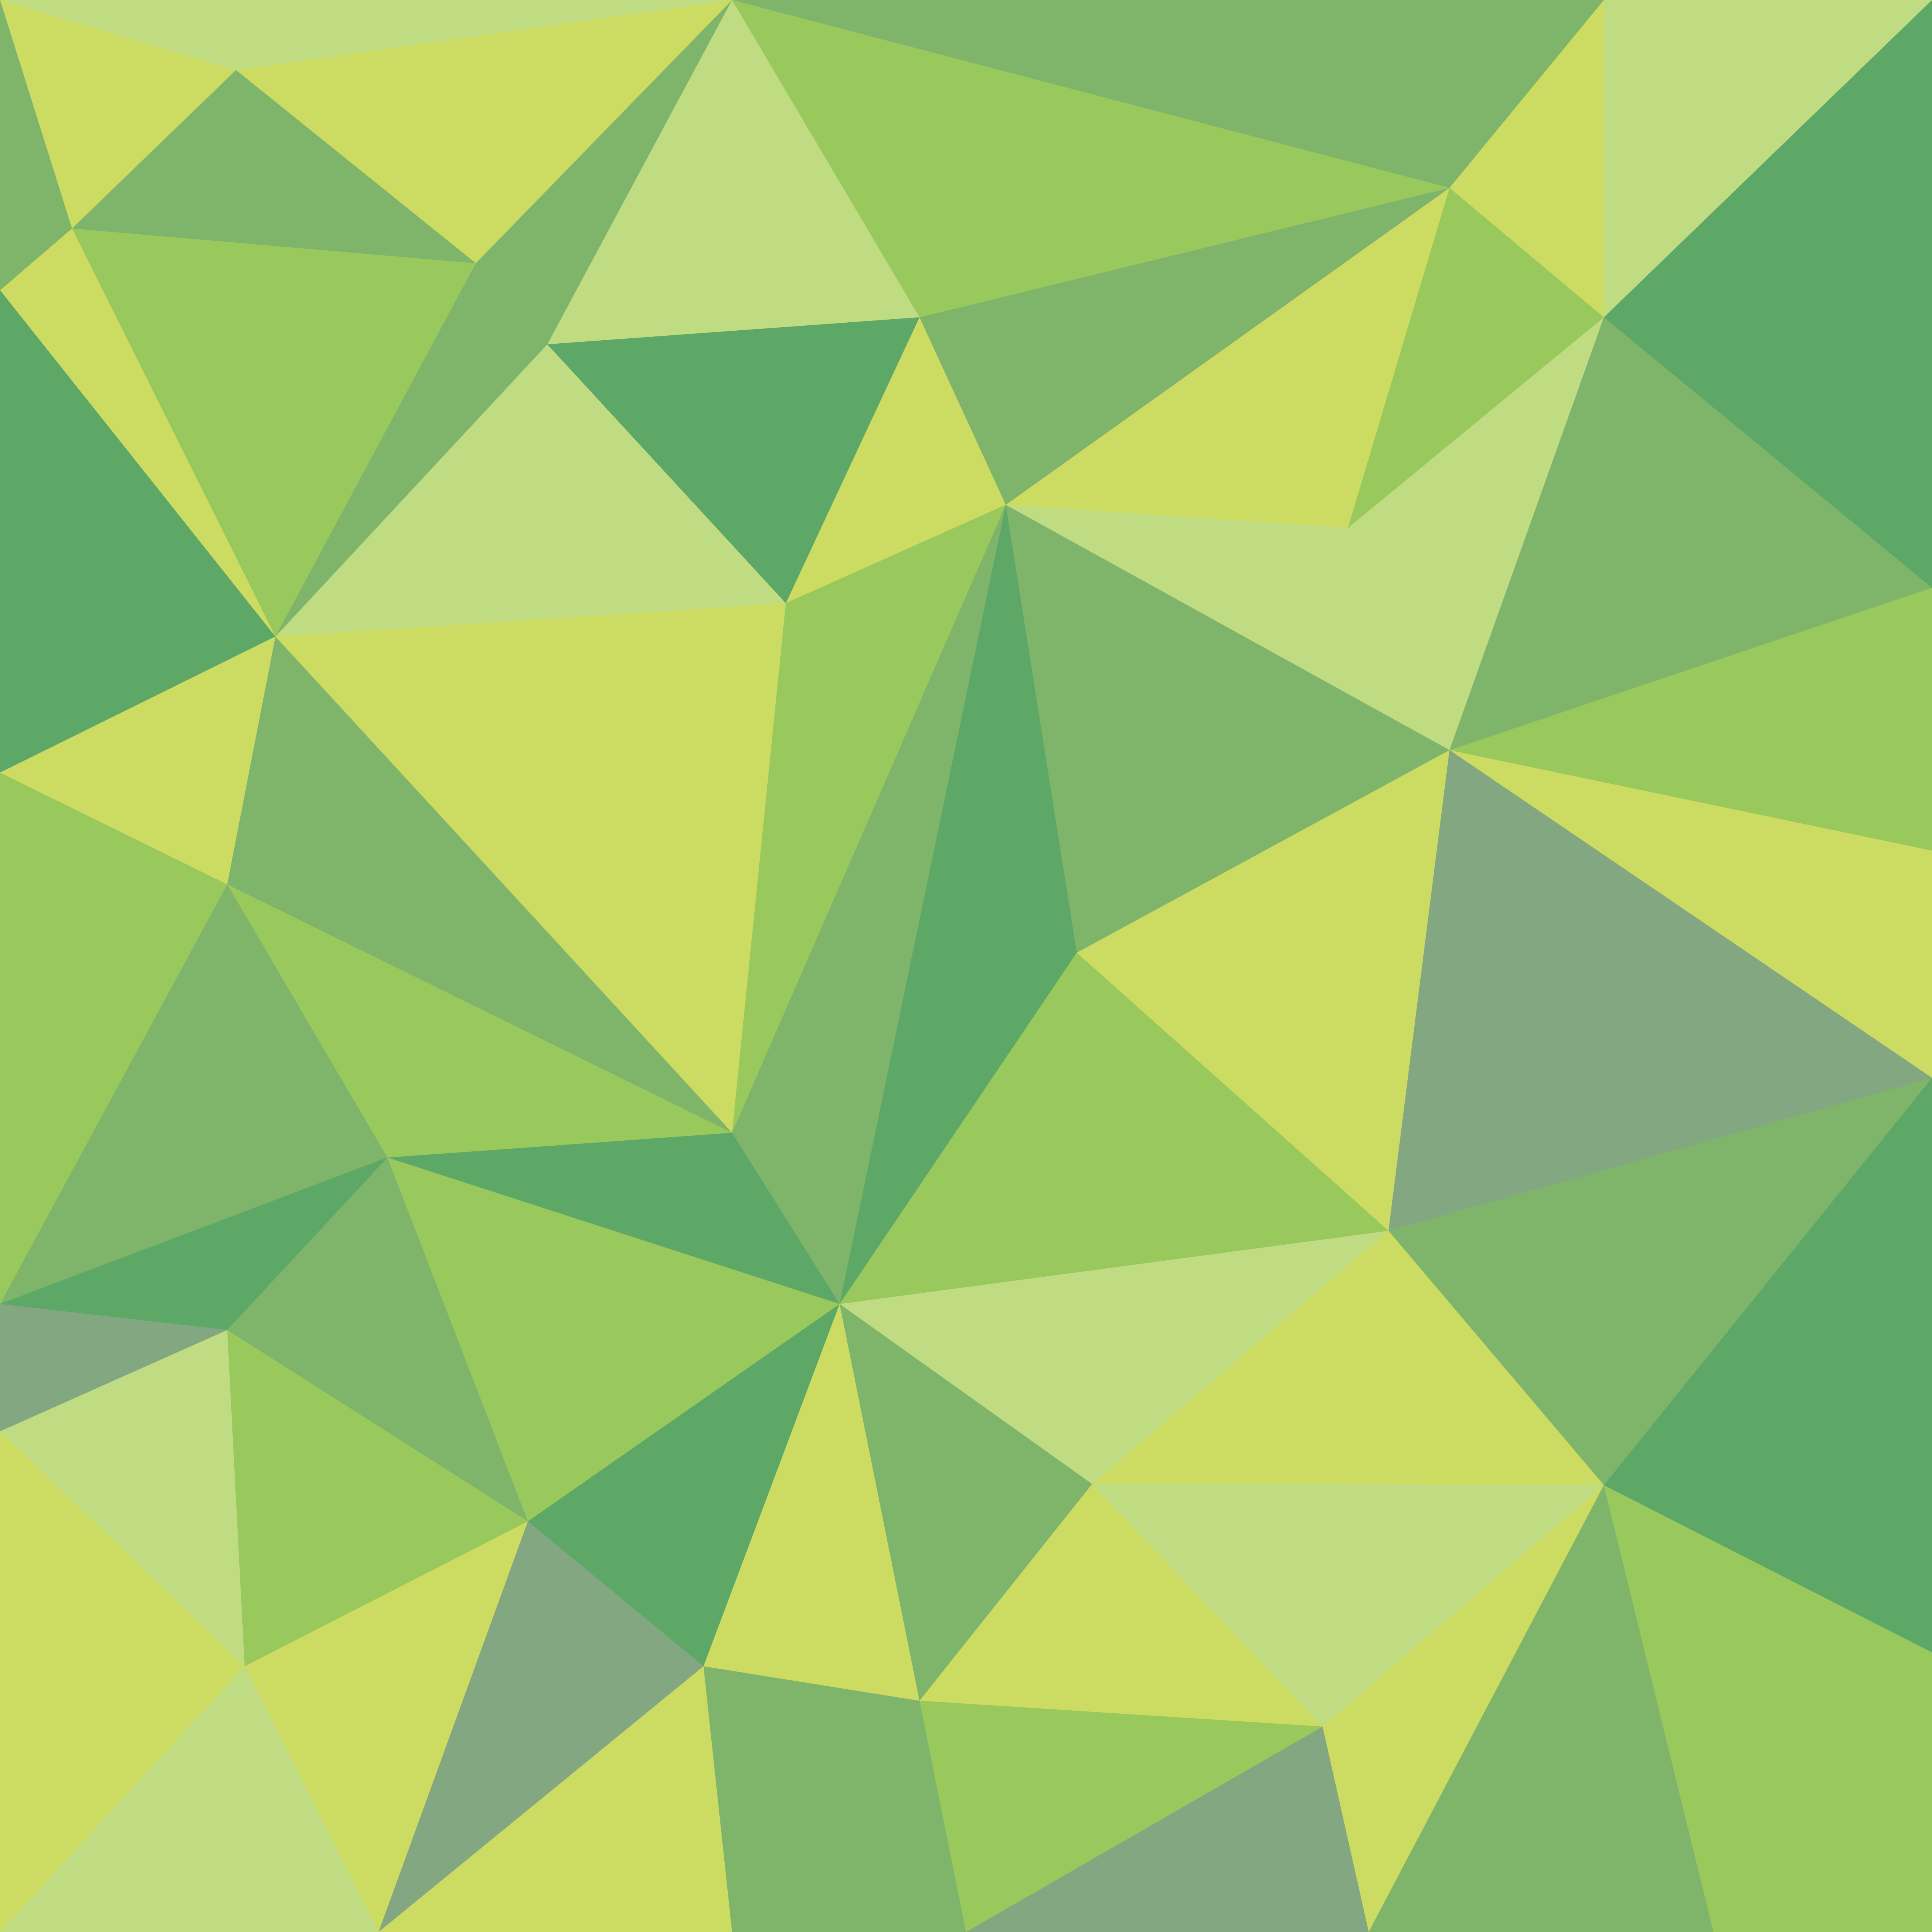 Wallpaper, illustration, abstract, symmetry, green, yellow, triangle, pattern, circle, ART, leaf, shape, design, line 5071x5071